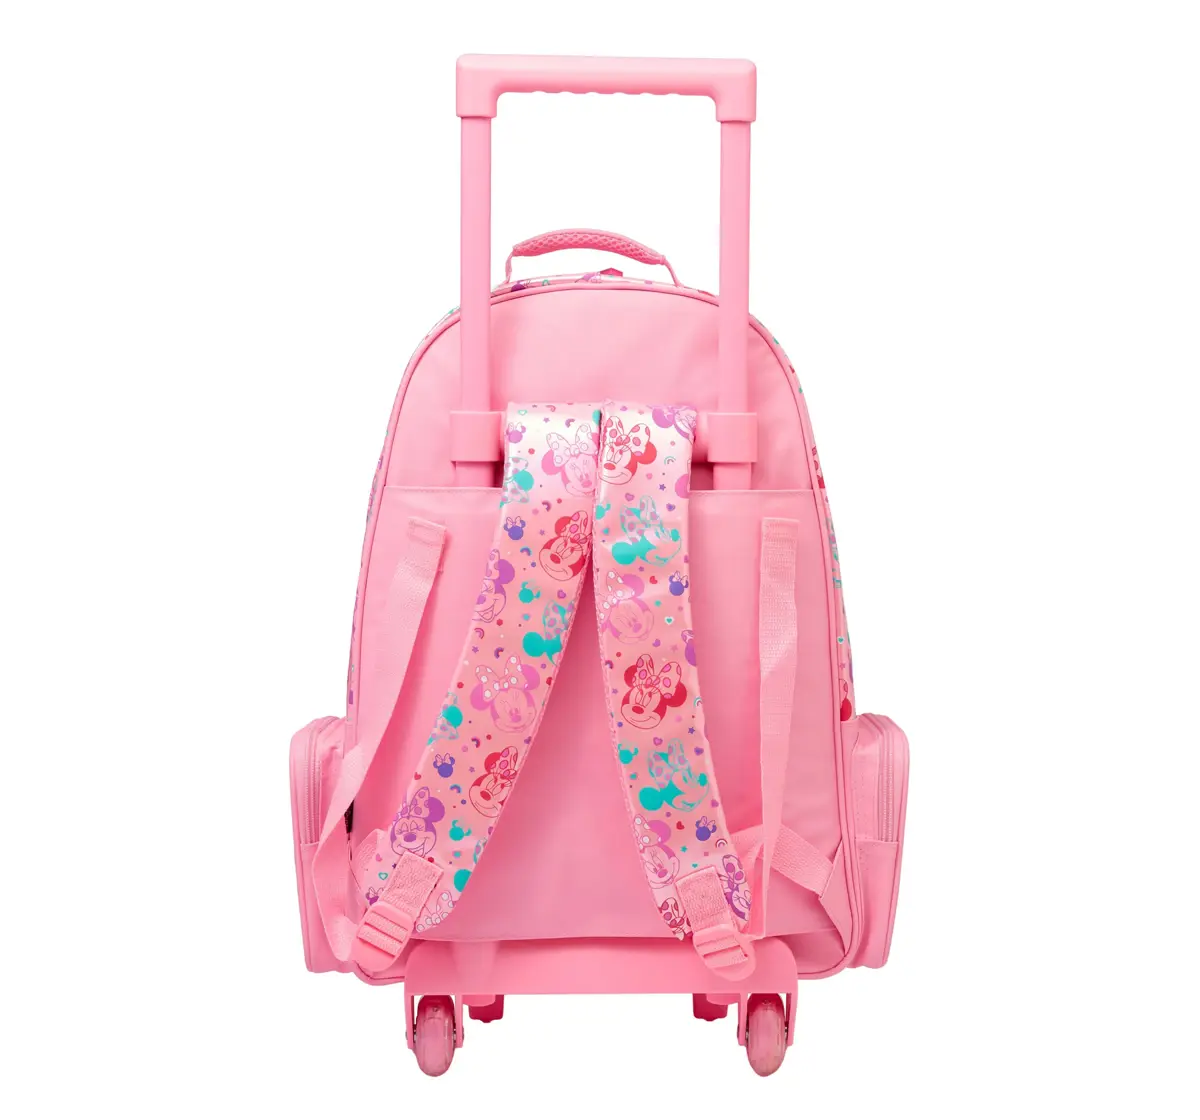 Smiggle Minnie Mouse Trolley Bag With Light Up Wheels, Pink, 3Y+